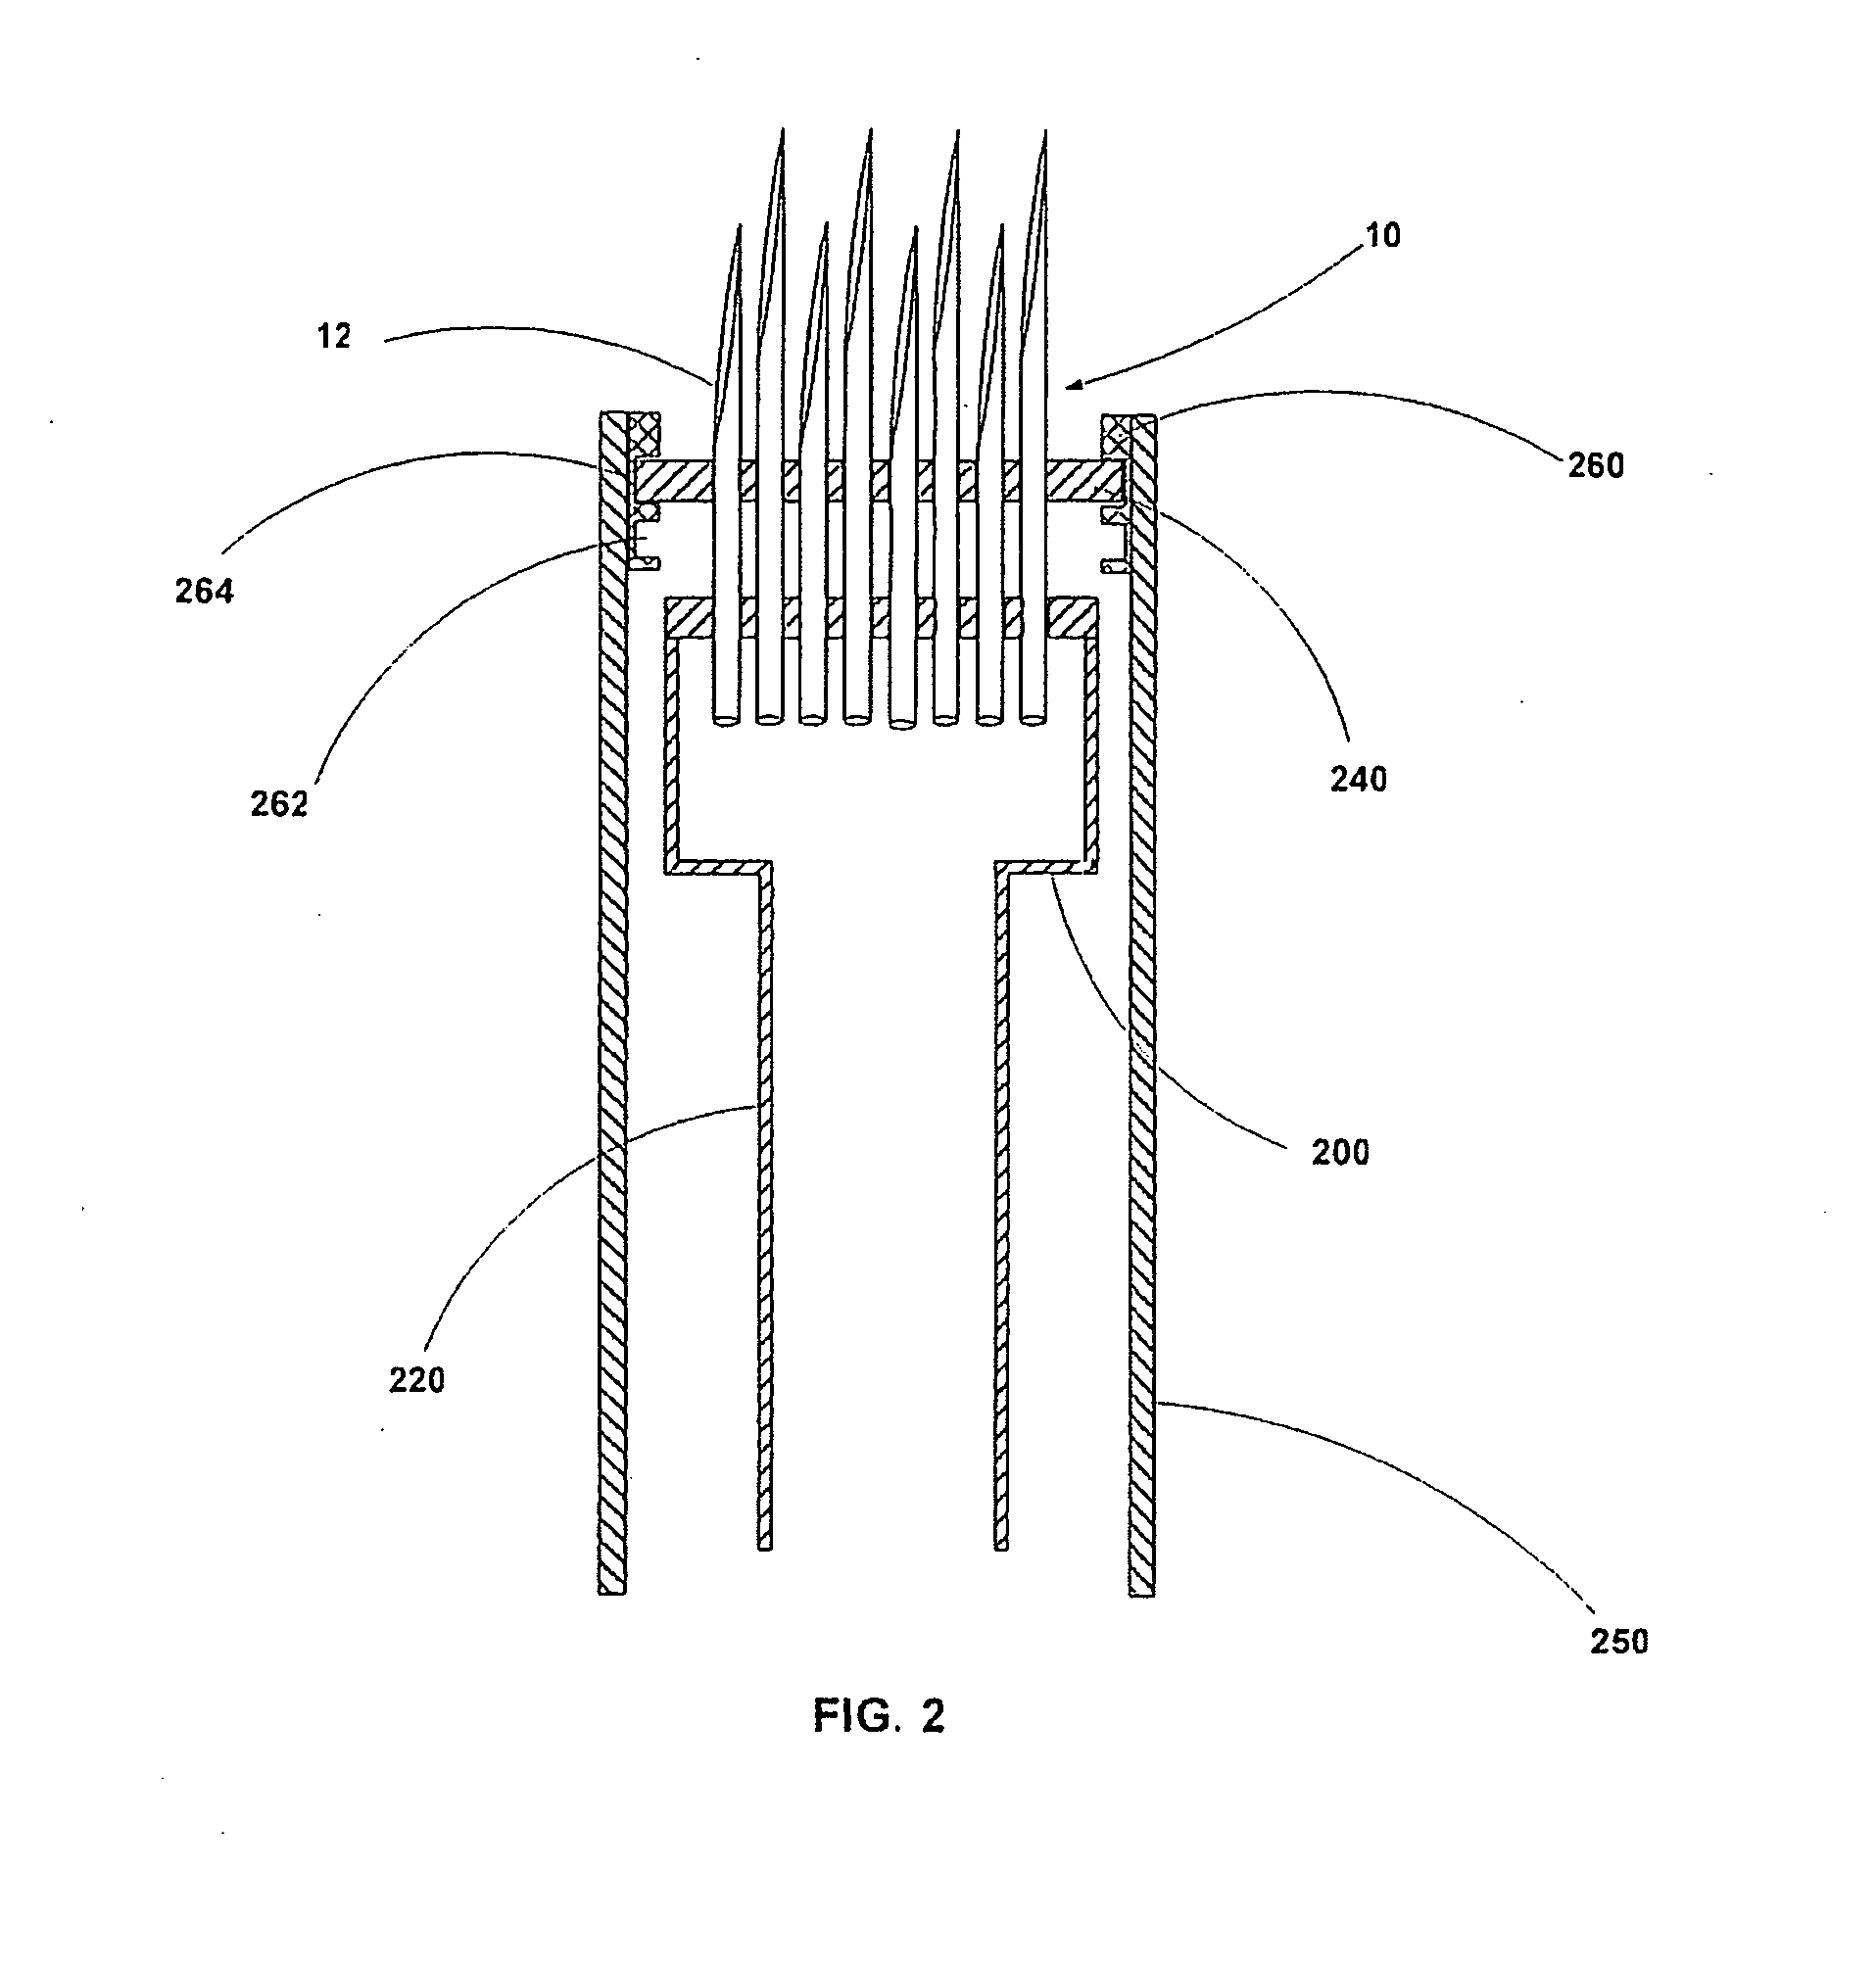 Method, system and device for delivering a substance to tissue